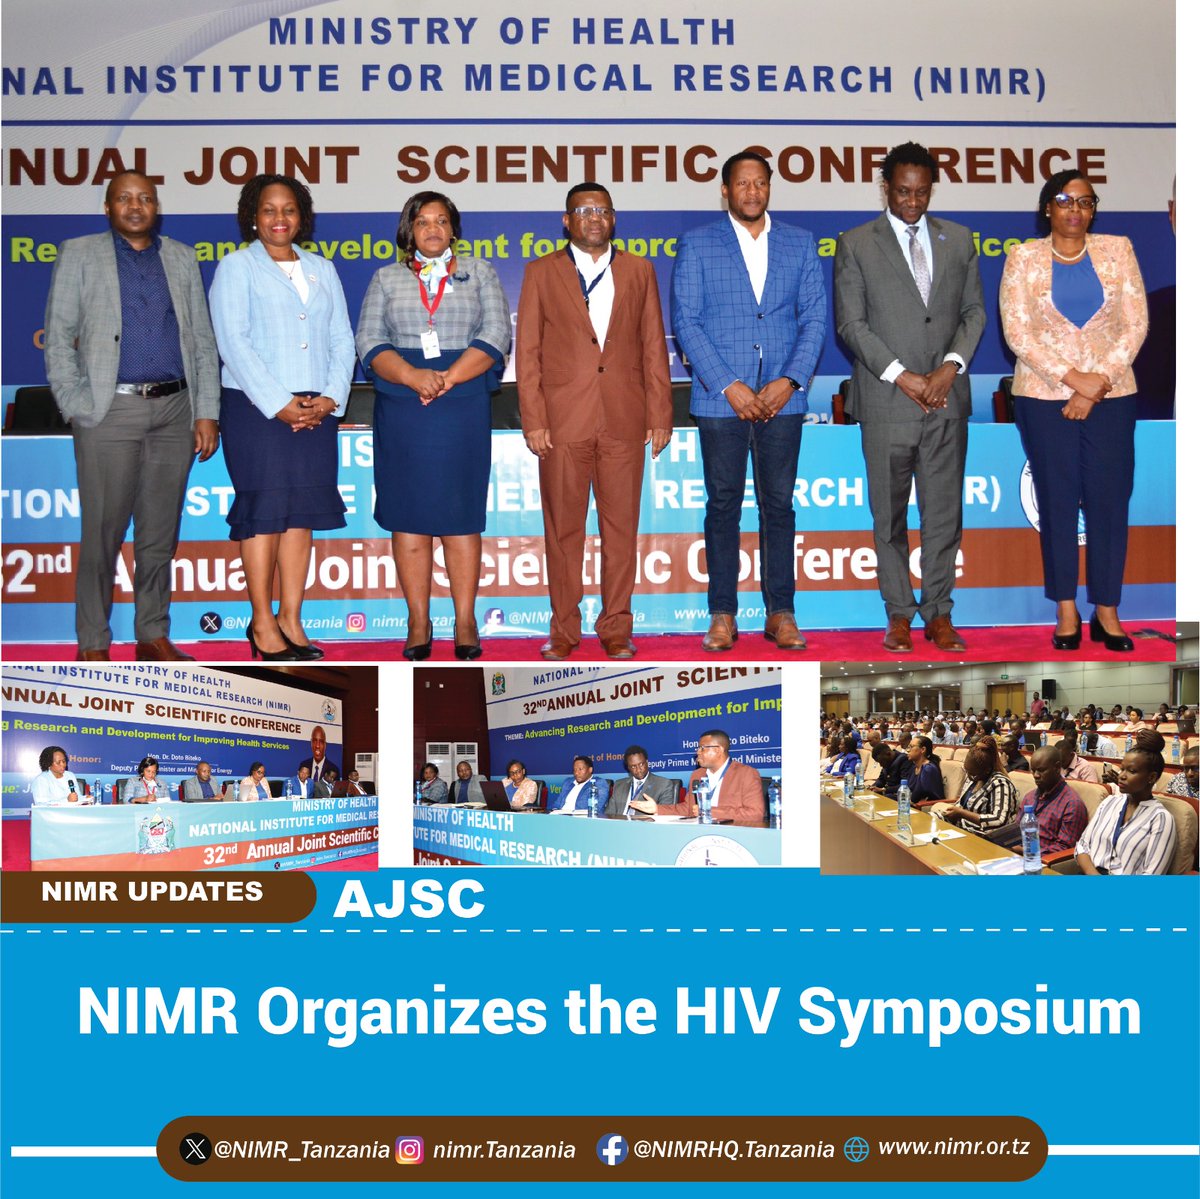 𝗡𝗜𝗠𝗥 𝗢𝗿𝗴𝗮𝗻𝗶𝘇𝗲𝘀 𝘁𝗵𝗲 𝗛𝗜𝗩 𝗦𝘆𝗺𝗽𝗼𝘀𝗶𝘂𝗺 The National Institute for Medical Research (NIMR) organized the HIV symposium titled 𝙃𝙄𝙑 𝙀𝙥𝙞𝙙𝙚𝙢𝙞𝙘 𝘾𝙤𝙣𝙩𝙧𝙤𝙡 𝙗𝙮 𝟐𝟎𝟑𝟎: 𝙏𝙝𝙚 𝙧𝙤𝙡𝙚 𝙤𝙛 𝙀𝙫𝙞𝙙𝙚𝙣𝙘𝙚-𝘽𝙖𝙨𝙚𝙙 𝙋𝙧𝙖𝙘𝙩𝙞𝙘𝙚𝙨 𝙞𝙣